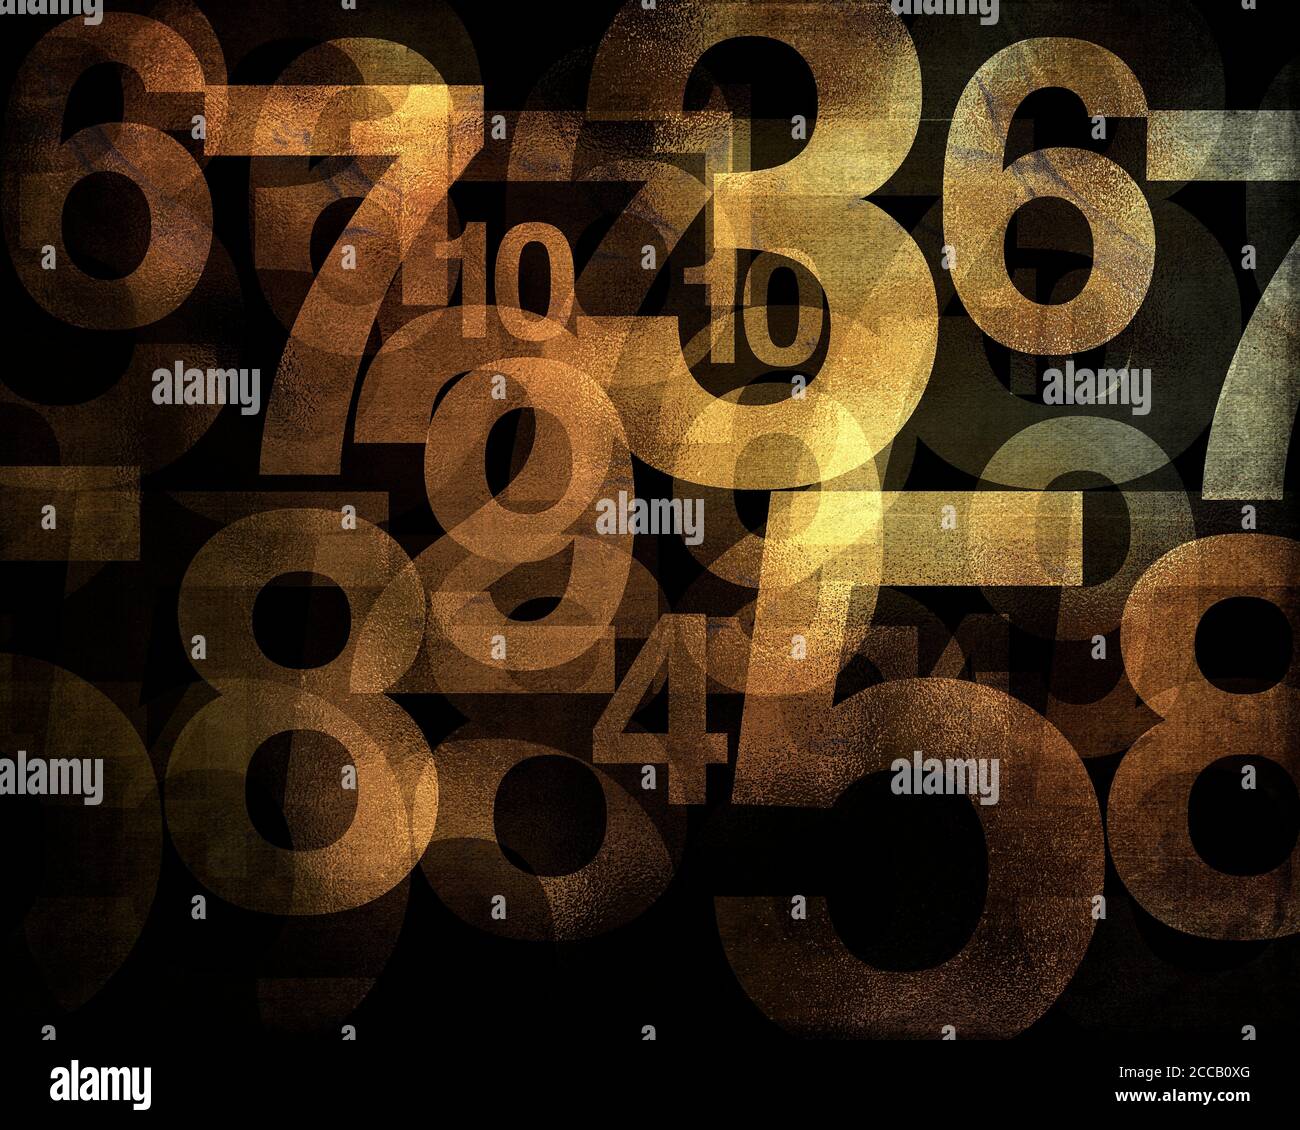 CONTEMPORARY ART: The Winning Numbers Stock Photo